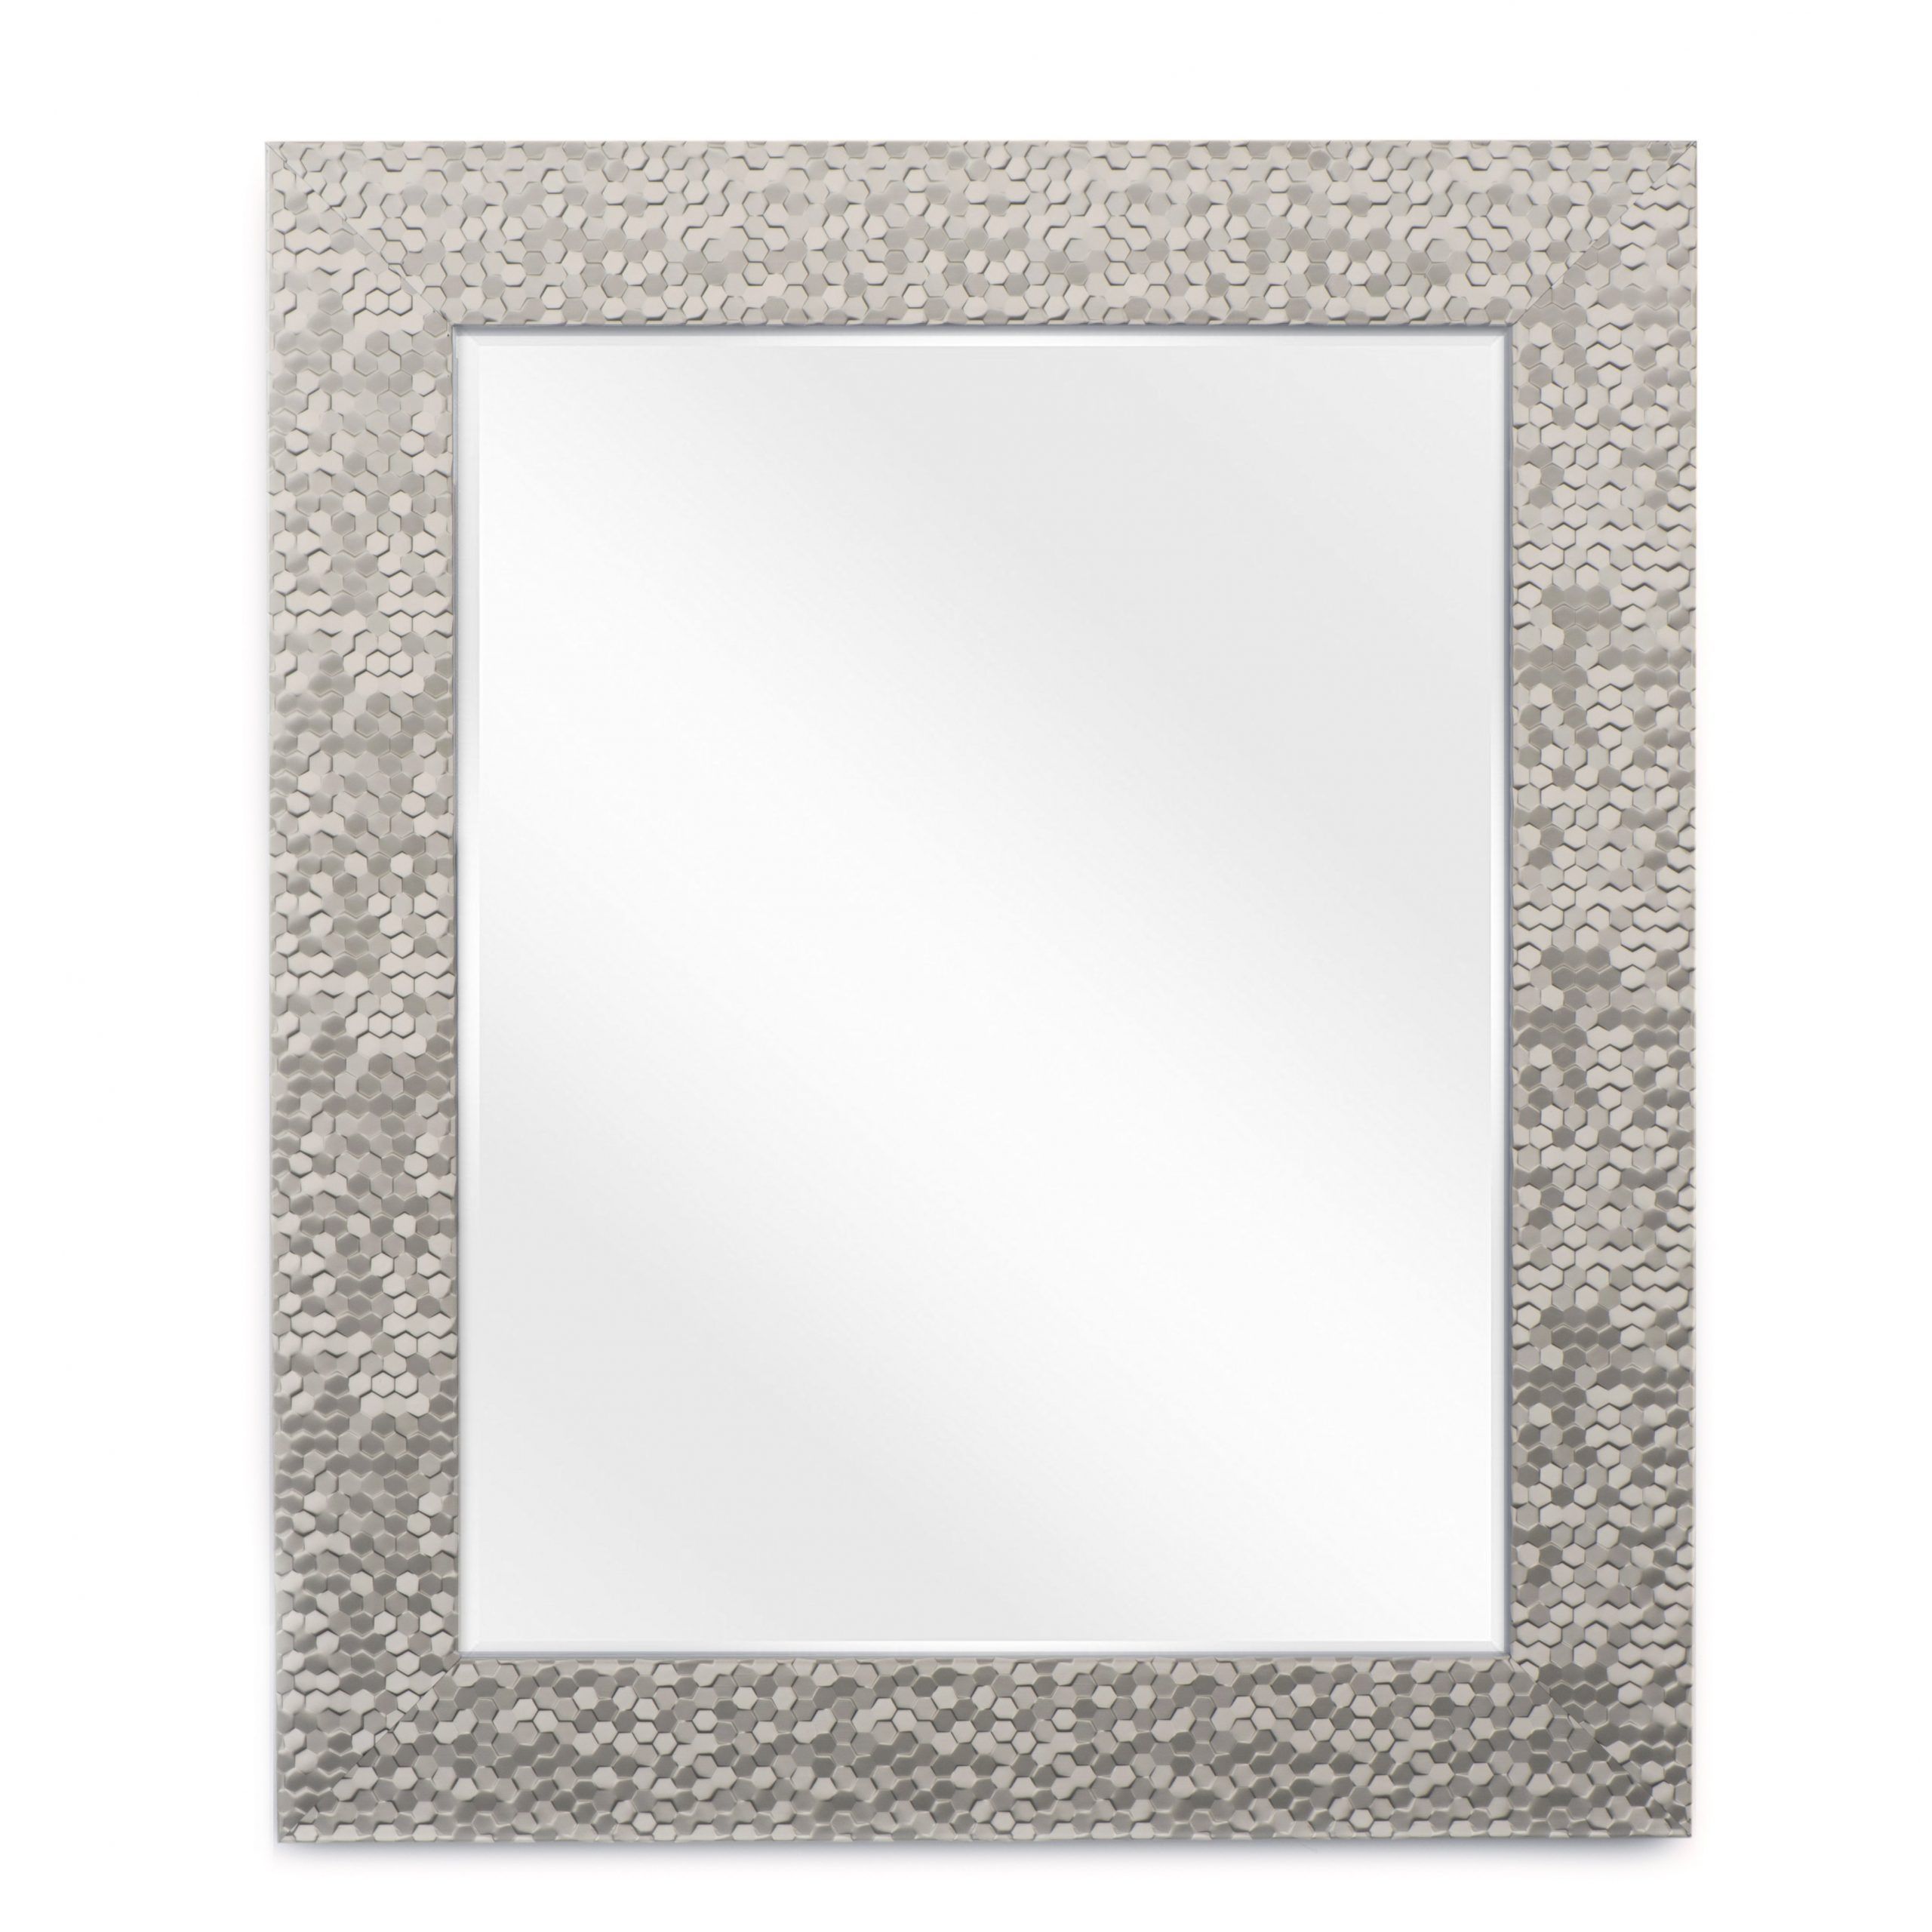 Wall Mirror For Bathroom Or Vanity , 21X25 Brushed Nickel – Walmart For Brushed Nickel Octagon Mirrors (View 11 of 15)